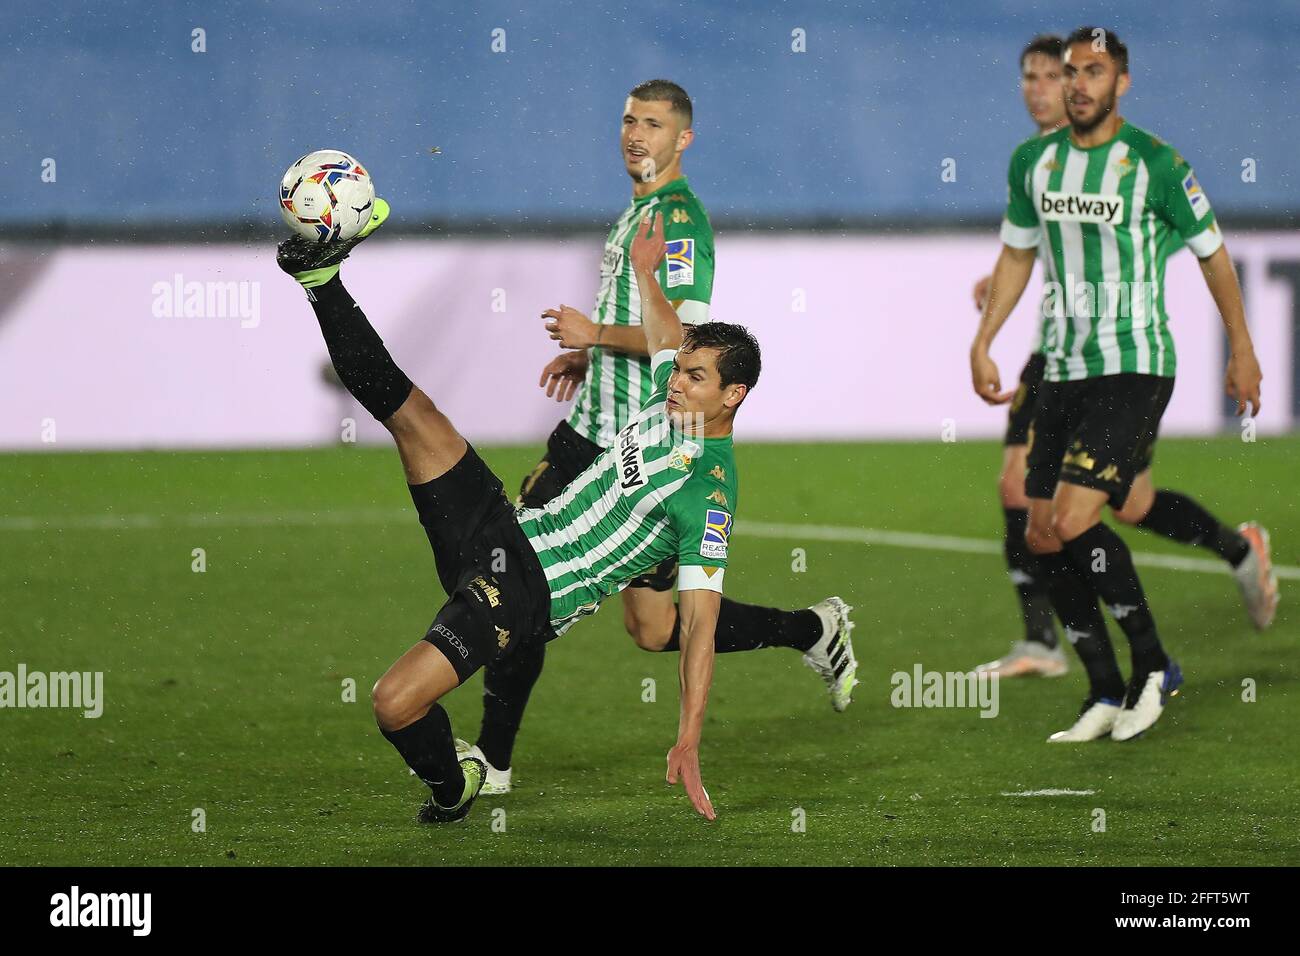 Madrid, Spain. 24th Apr, 2021. Real Betis' Aissa Mandi (front) competes during a Spanish league football match between Real Madrid and Real Betis in Madrid, Spain, on April 24, 2021. Credit: Edward F. Peters/Xinhua/Alamy Live News Stock Photo